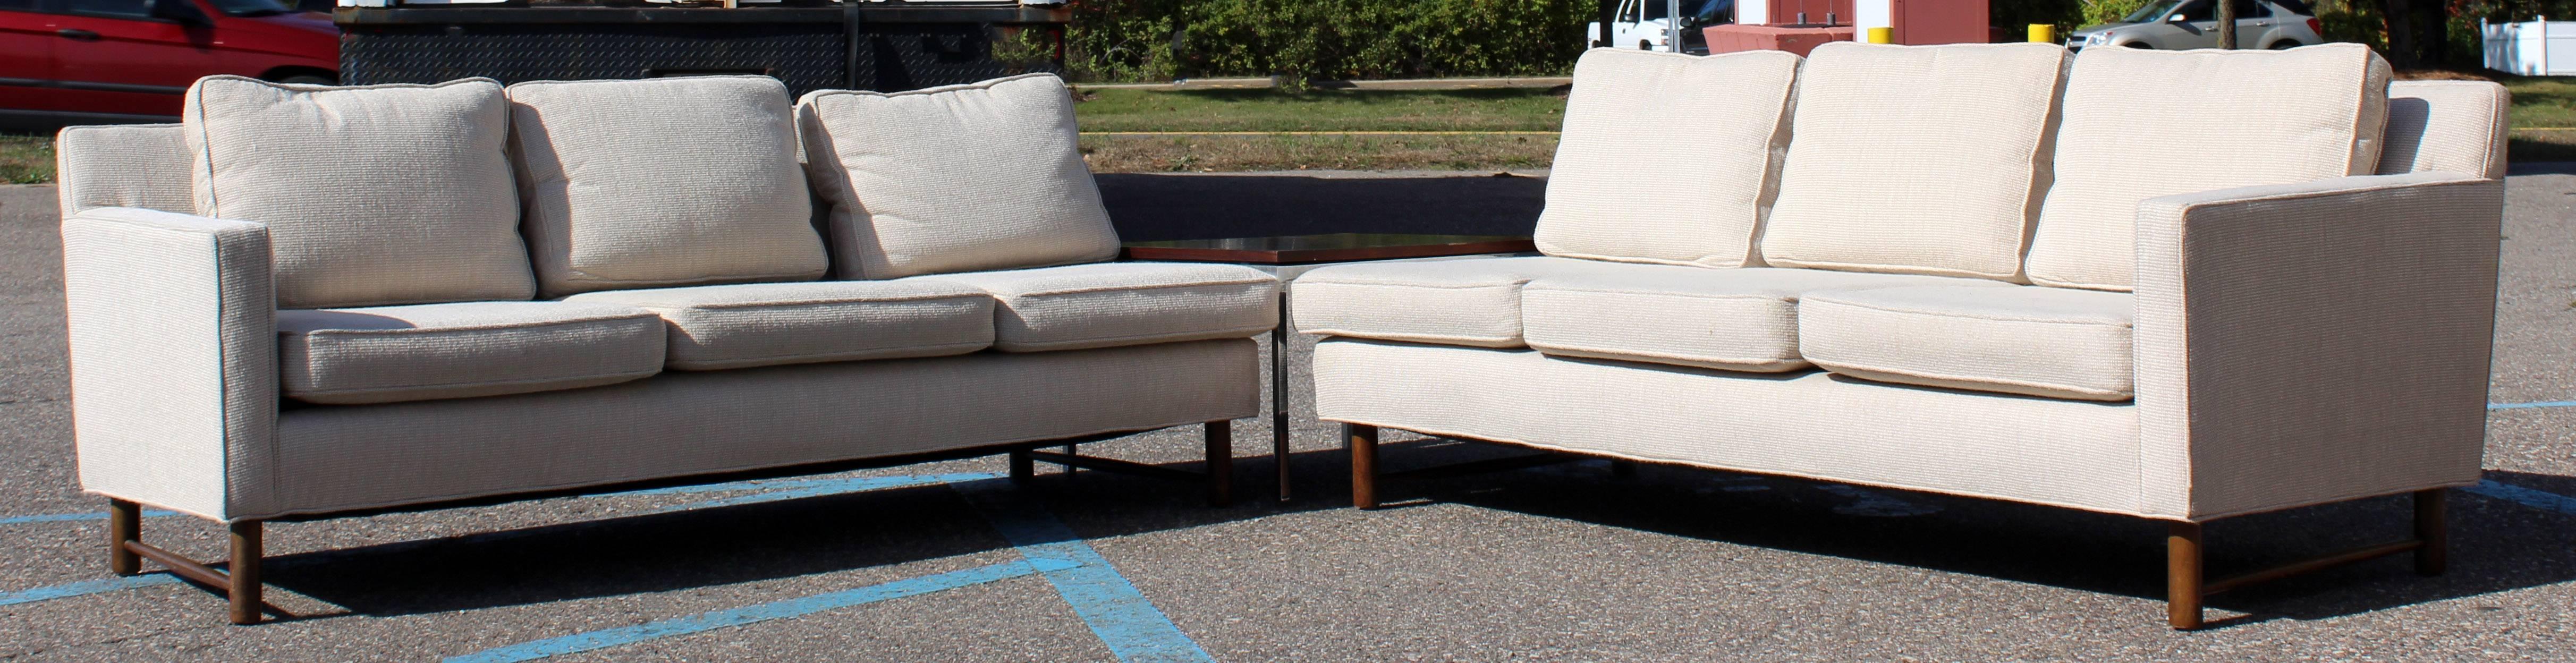 For your consideration is a fantastic, two-piece, sectional sofa, on a unique, wooden base, by Dunbar. In original nubby oatmeal wool blend fabric. In excellent condition. The dimensions of each piece are 70